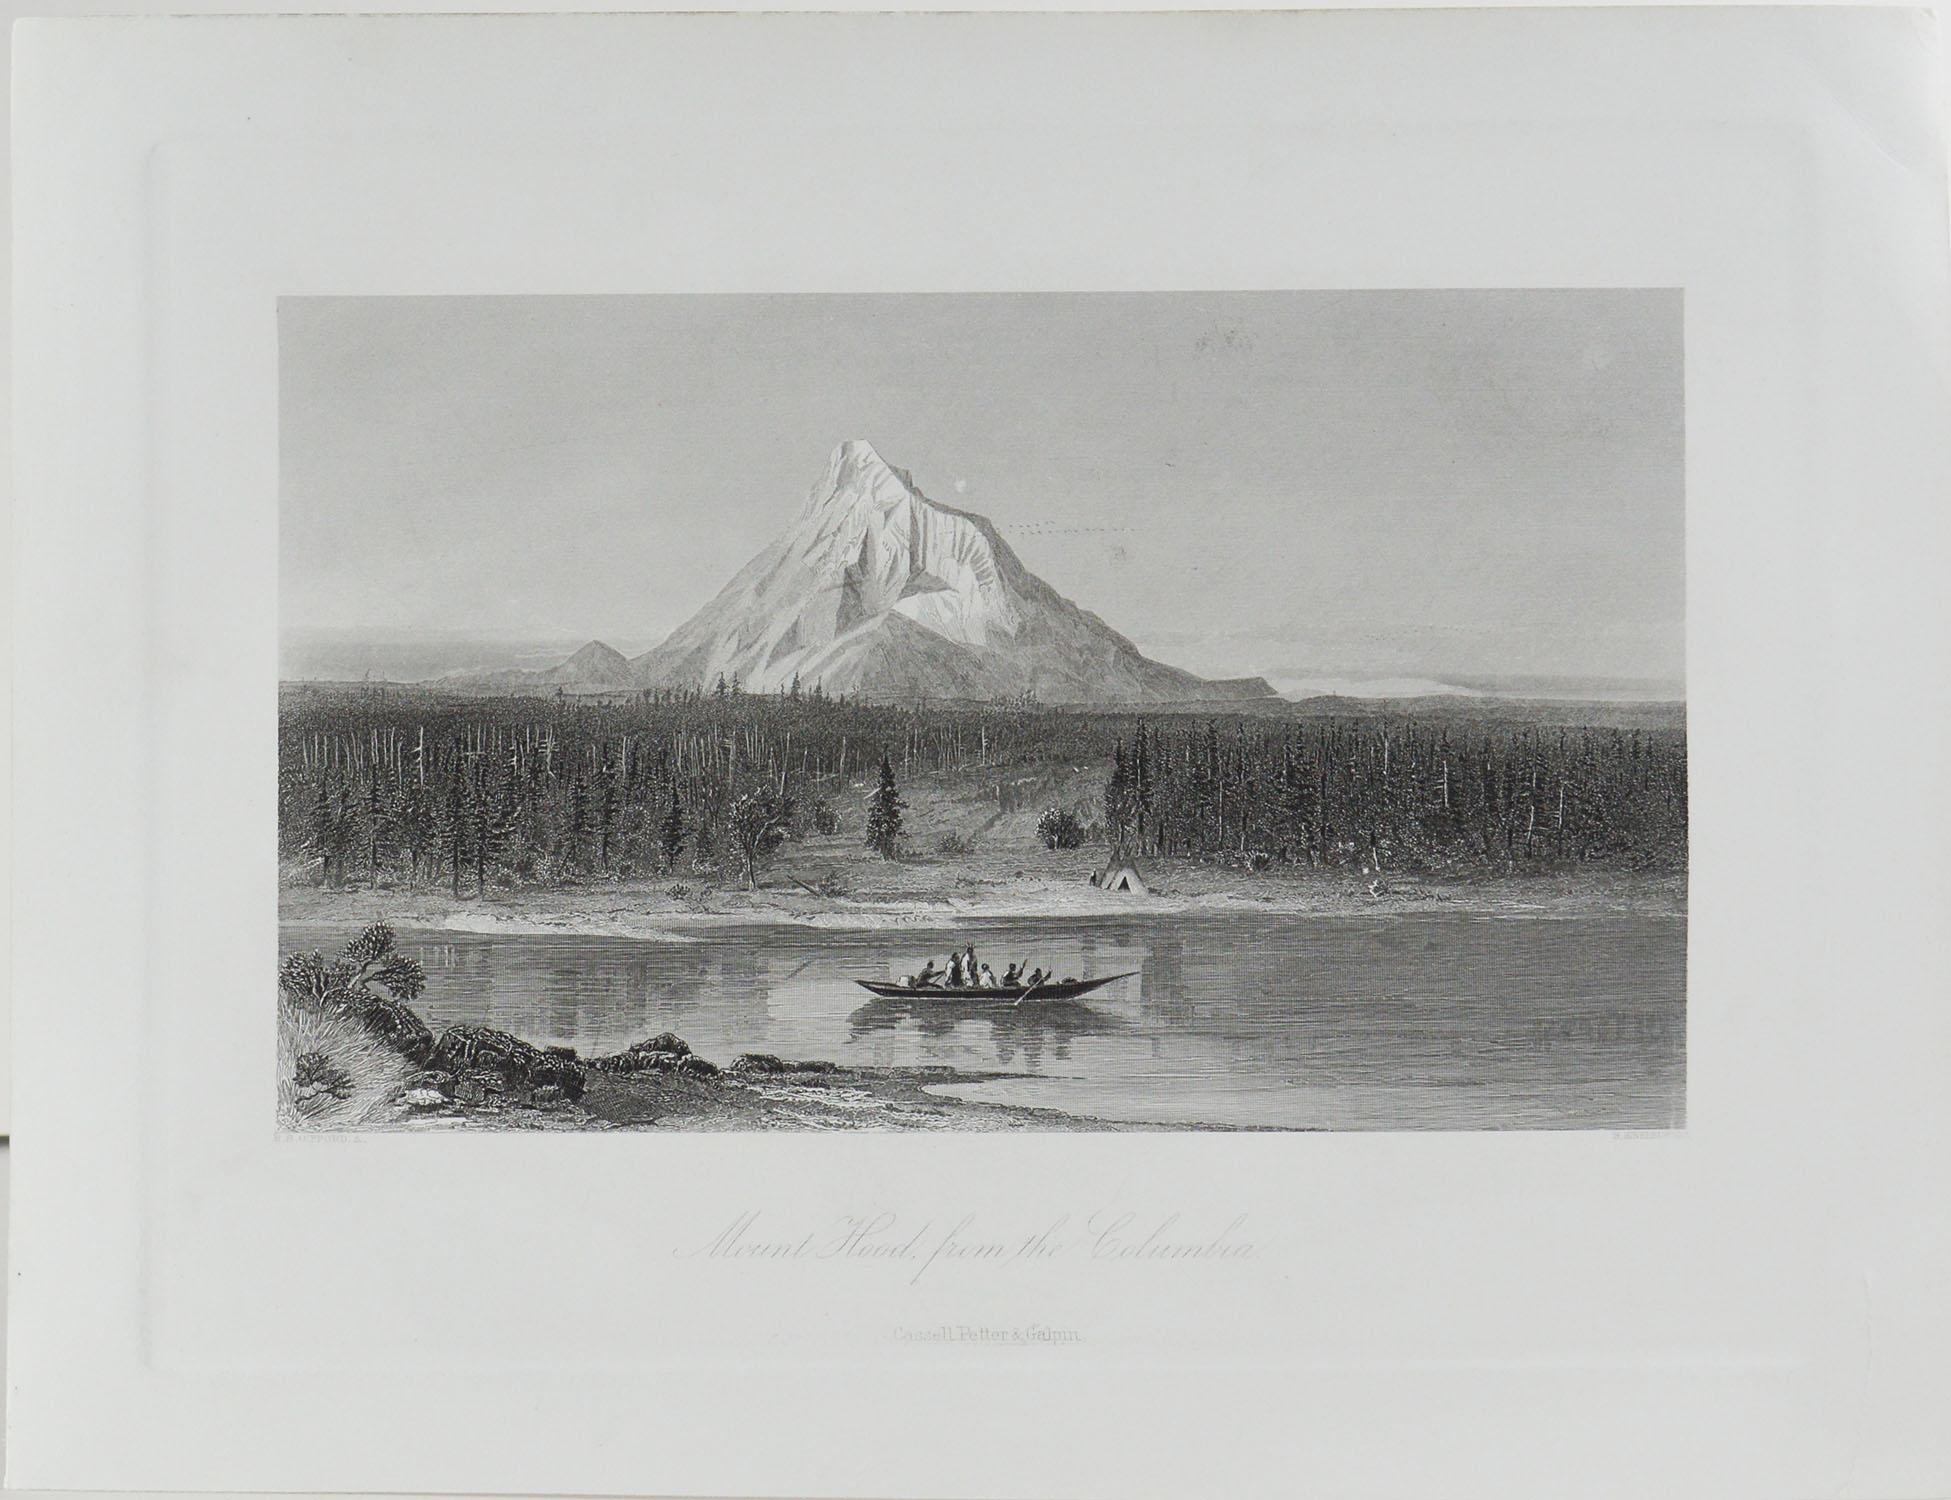 Great print of mount hood, Oregon

Steel engraving after the original drawing by R. S. Gifford

Published, circa 1870

Unframed.
    

Repair to a tear bottom right margin.